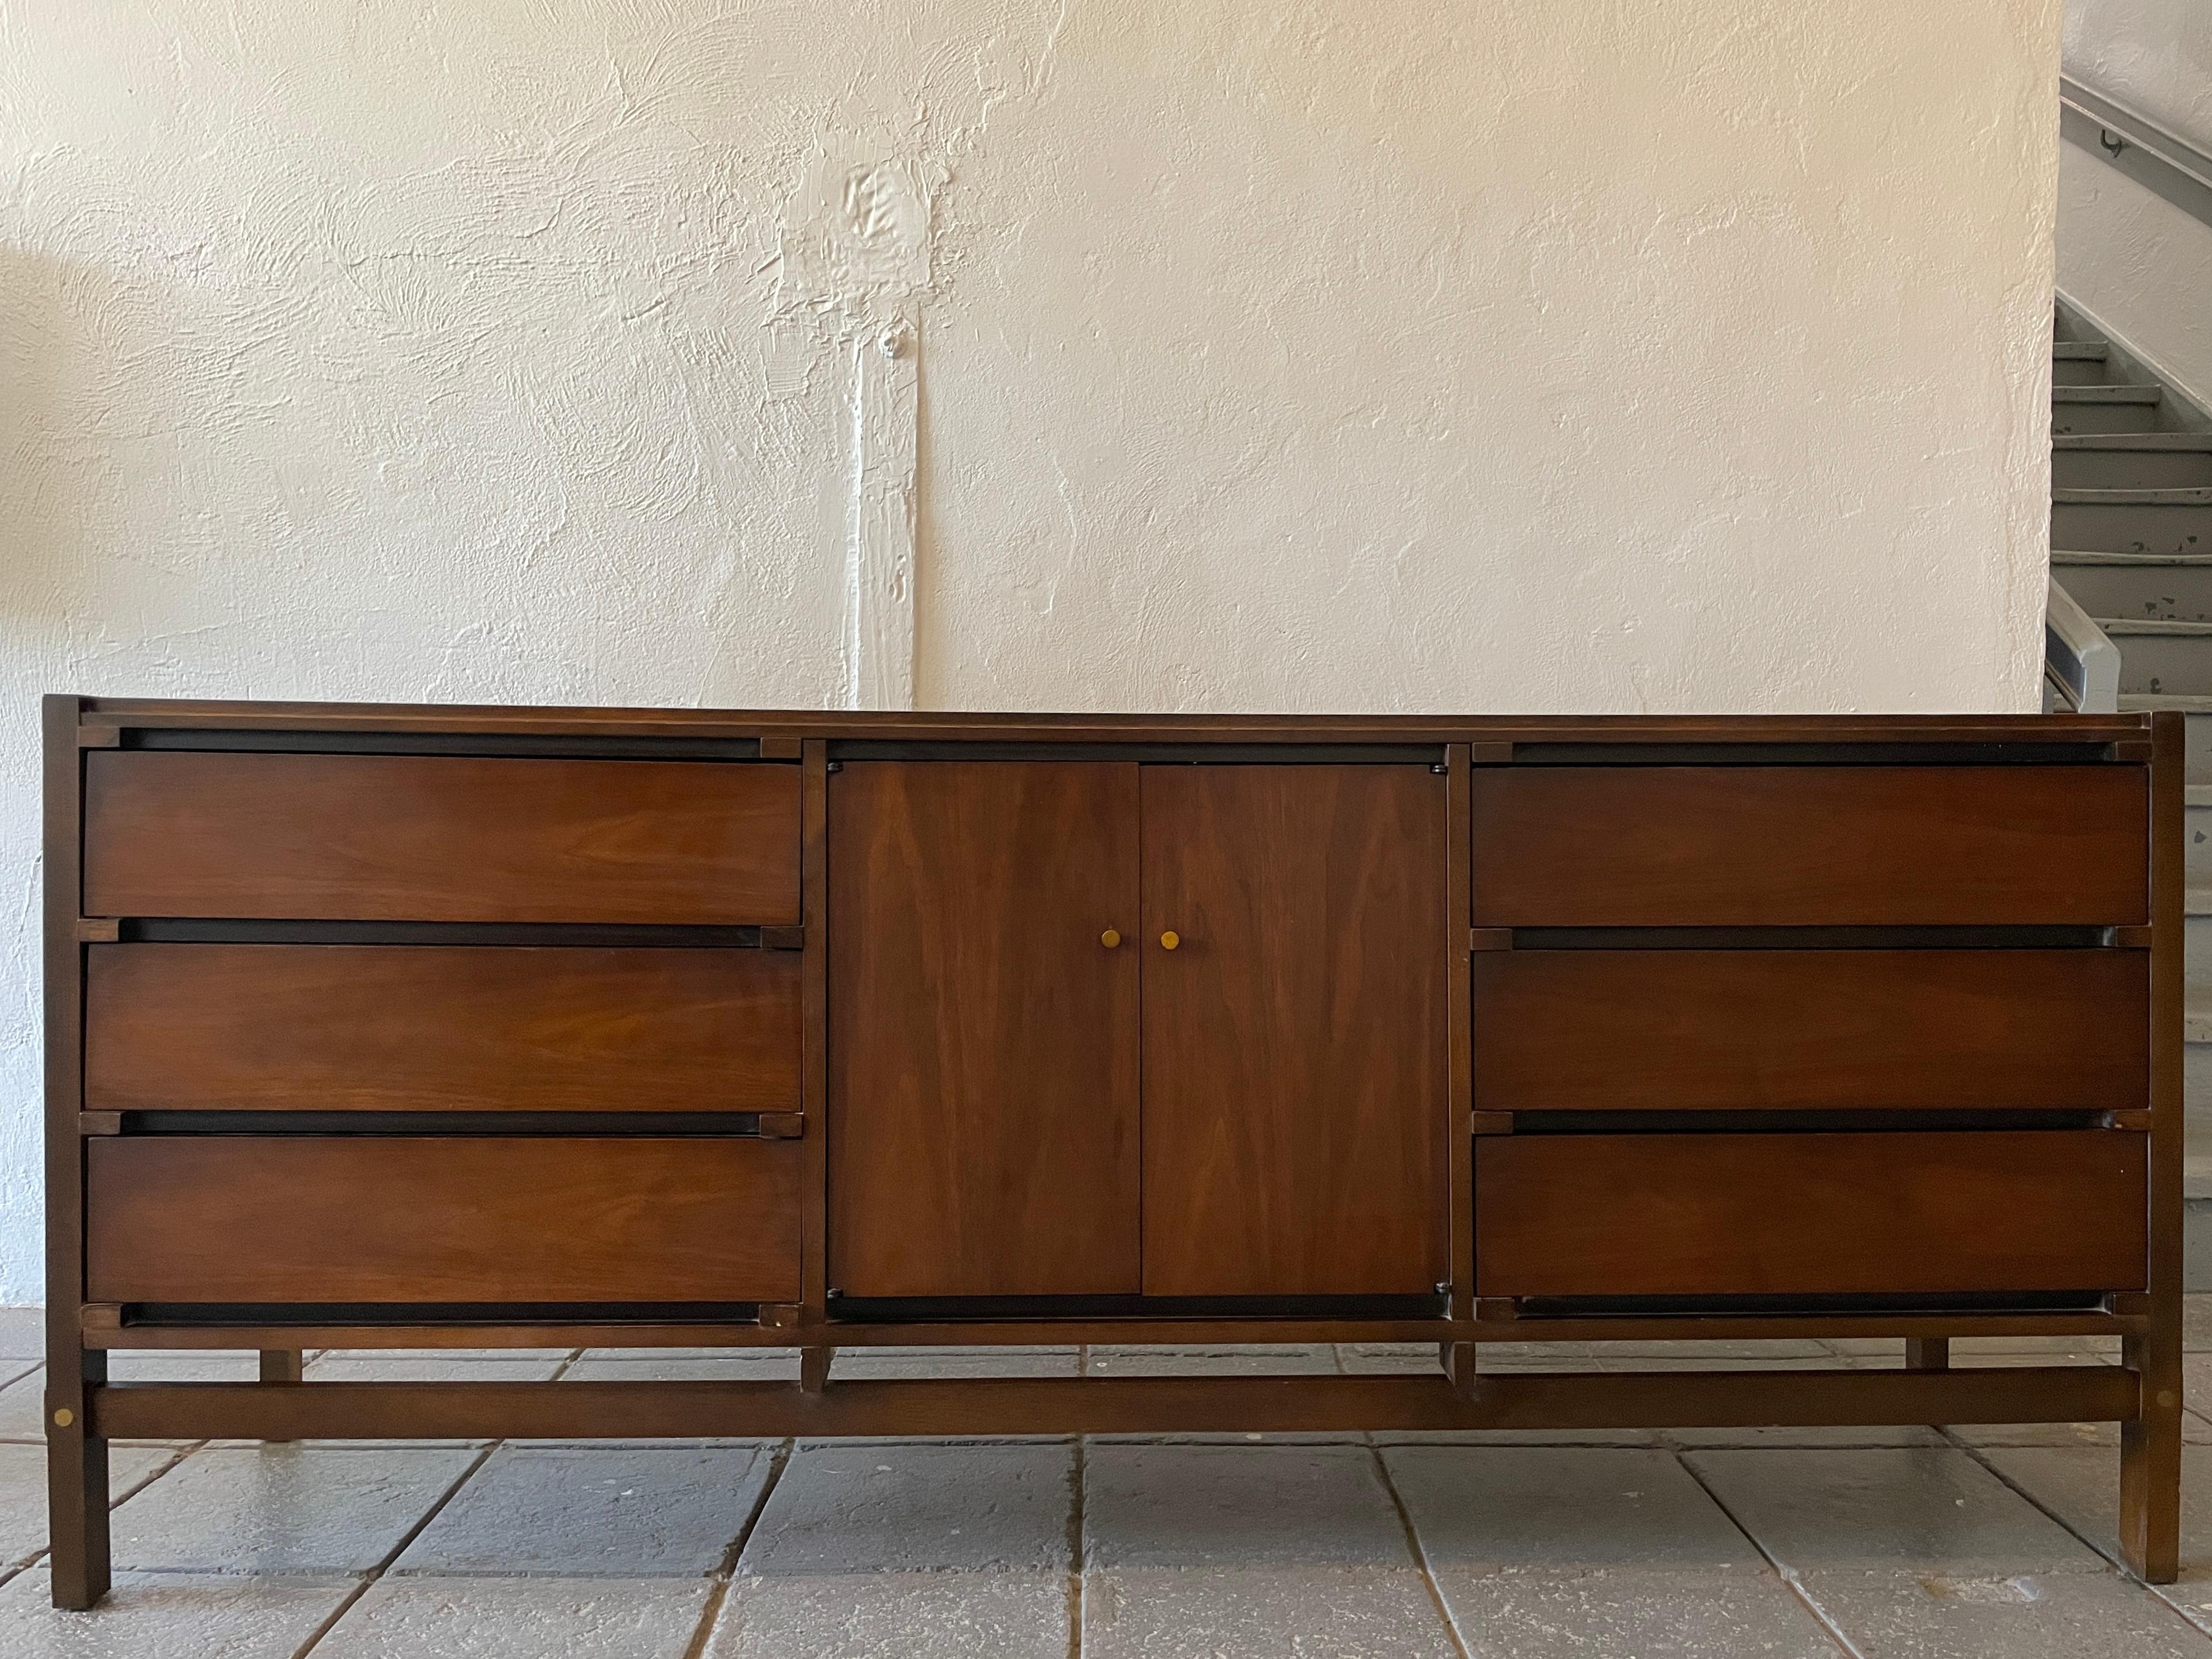 Mid-Century Modern Lane 9 drawer walnut credenza or dresser circa 1960s well built. Has six exposed drawers and 3 center drawers behind 2 cabinet doors with solid brass pulls. Made in USA by Lane Furniture co. Labeled. Located in Brooklyn NYC.